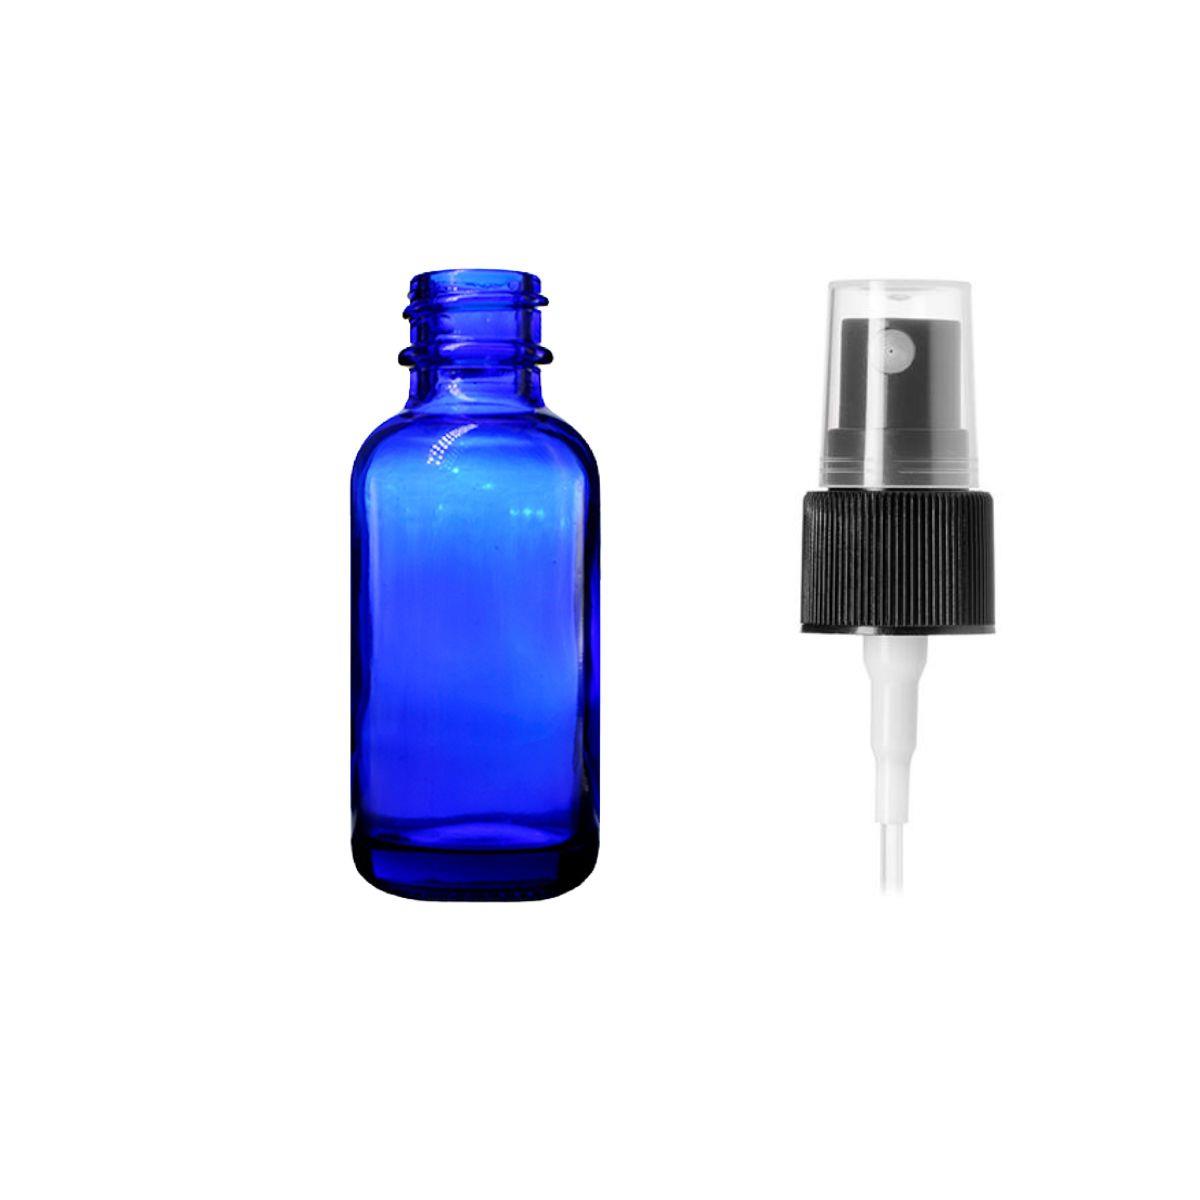 1 oz Blue Bottle with Spray Top